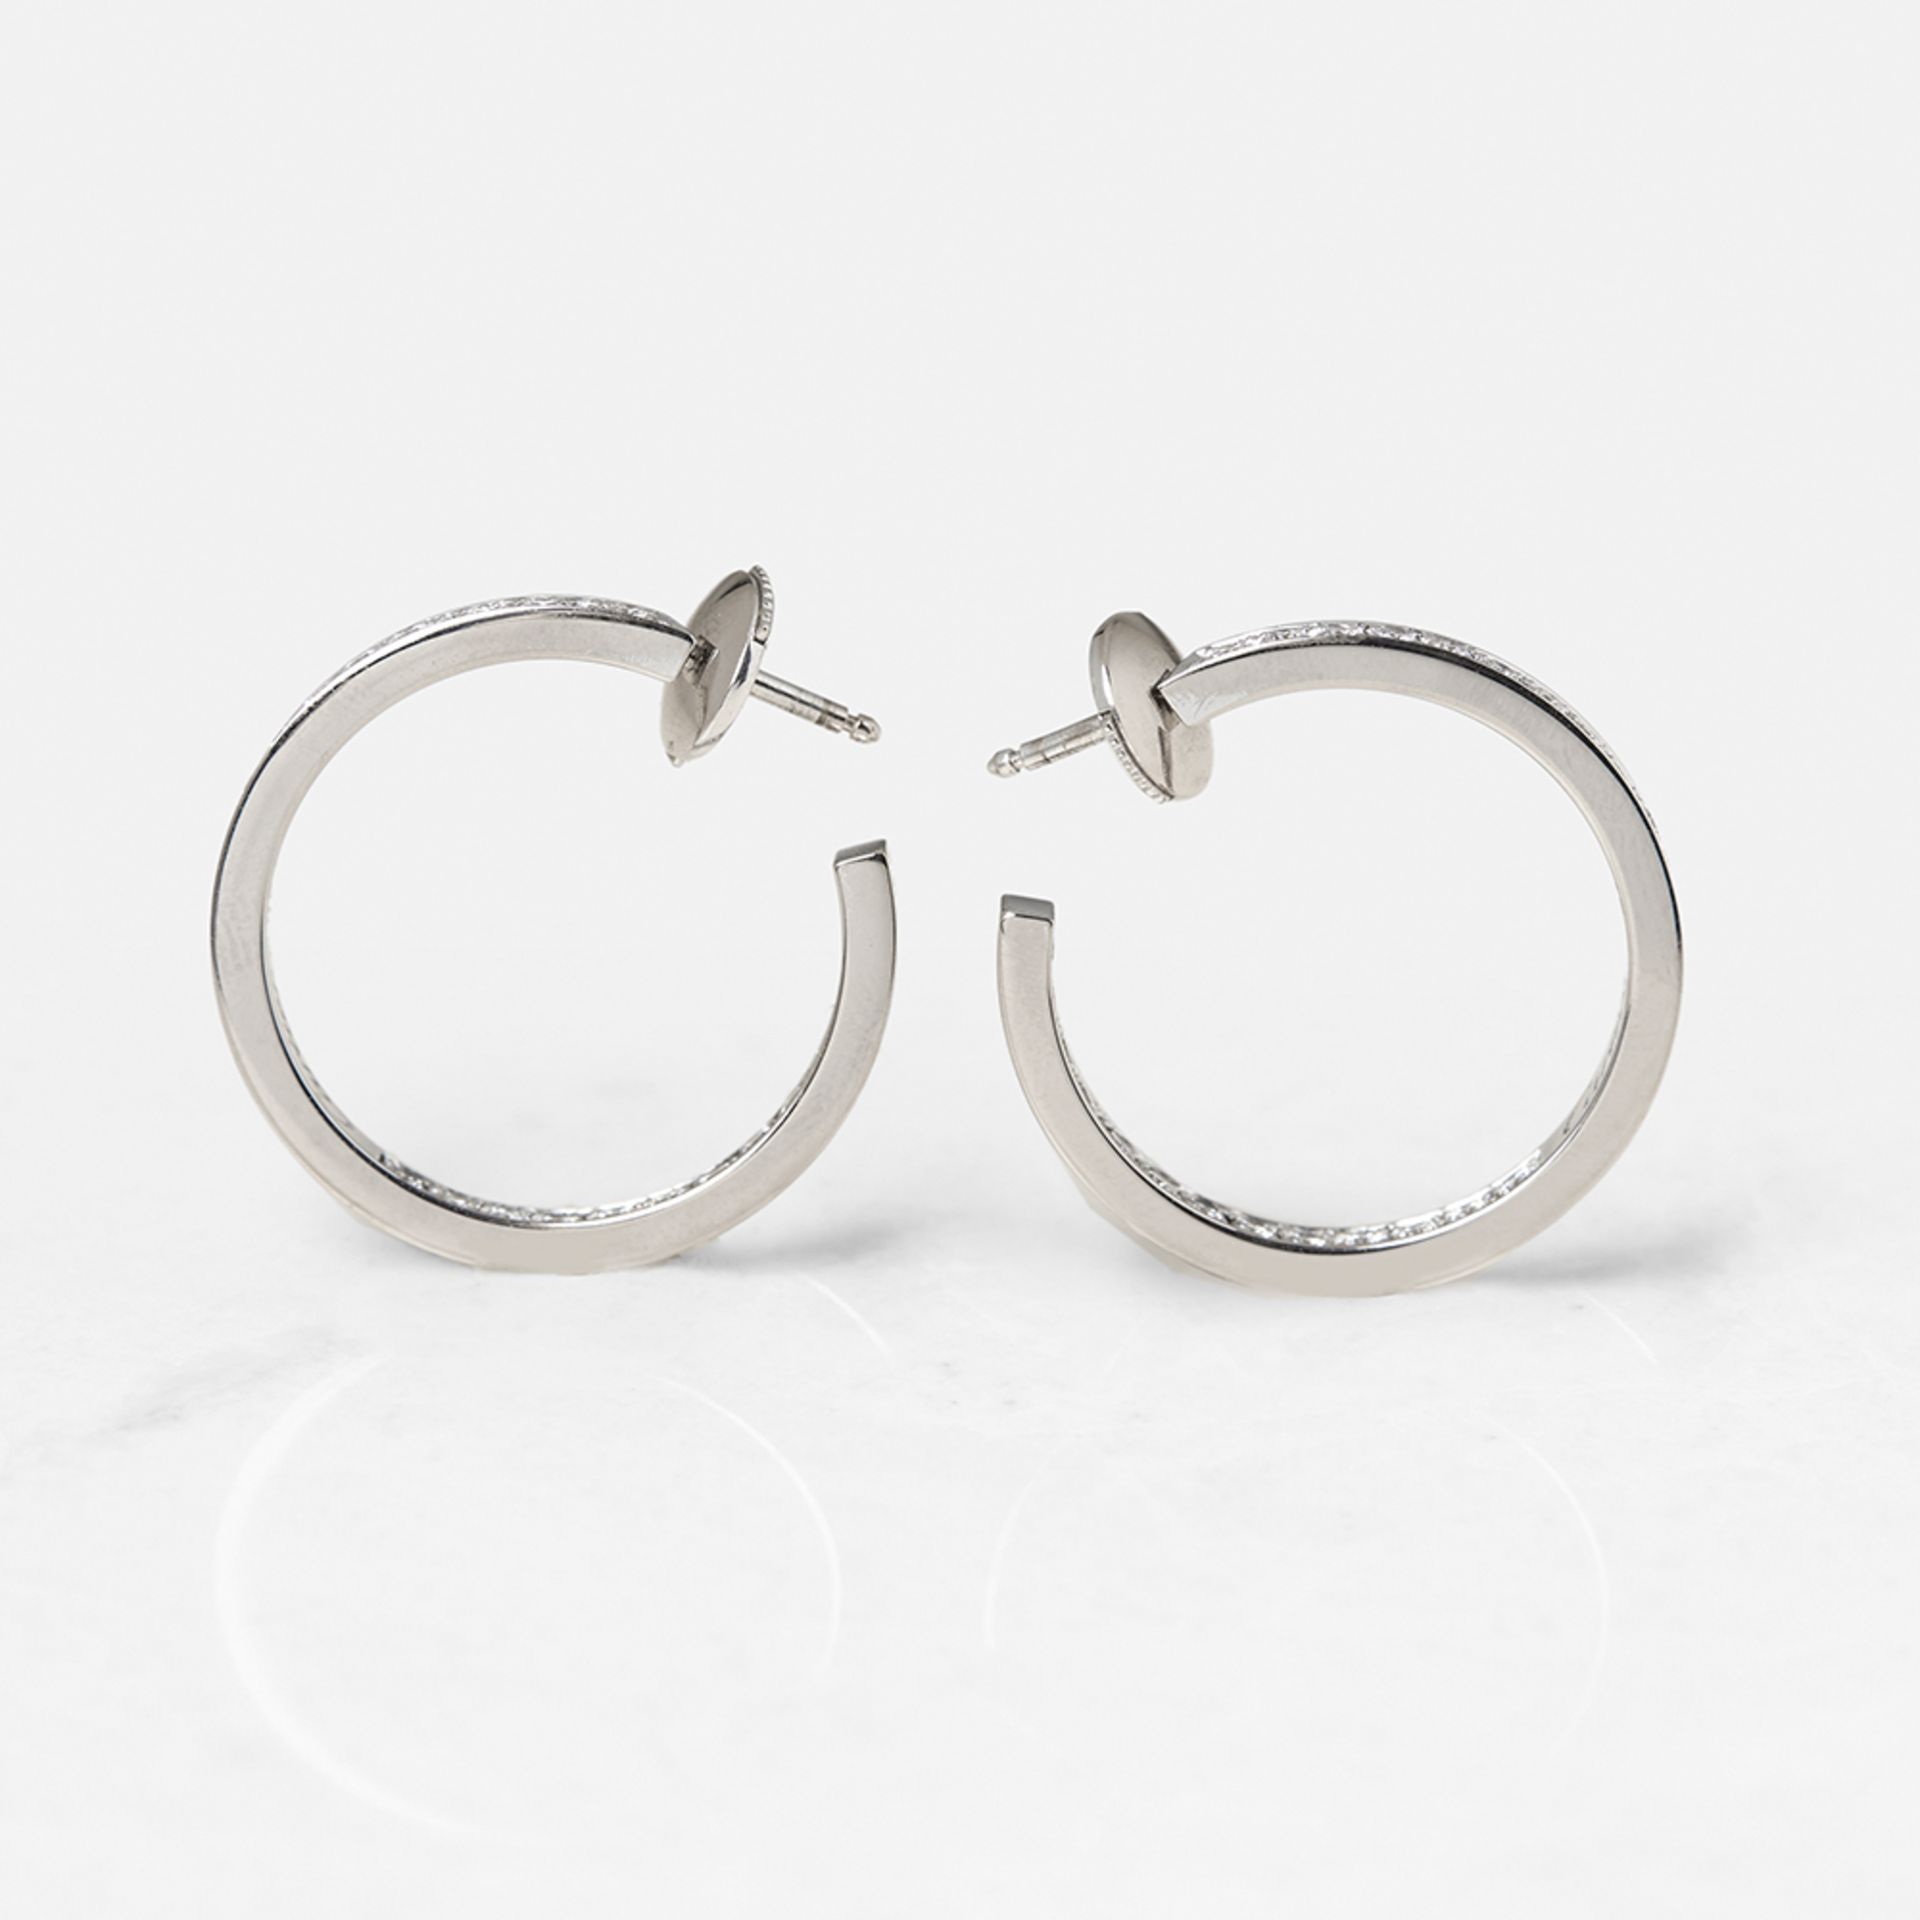 Cartier 18k White Gold 1.20ct Diamond Inside Out Hoop Earrings - Image 3 of 14